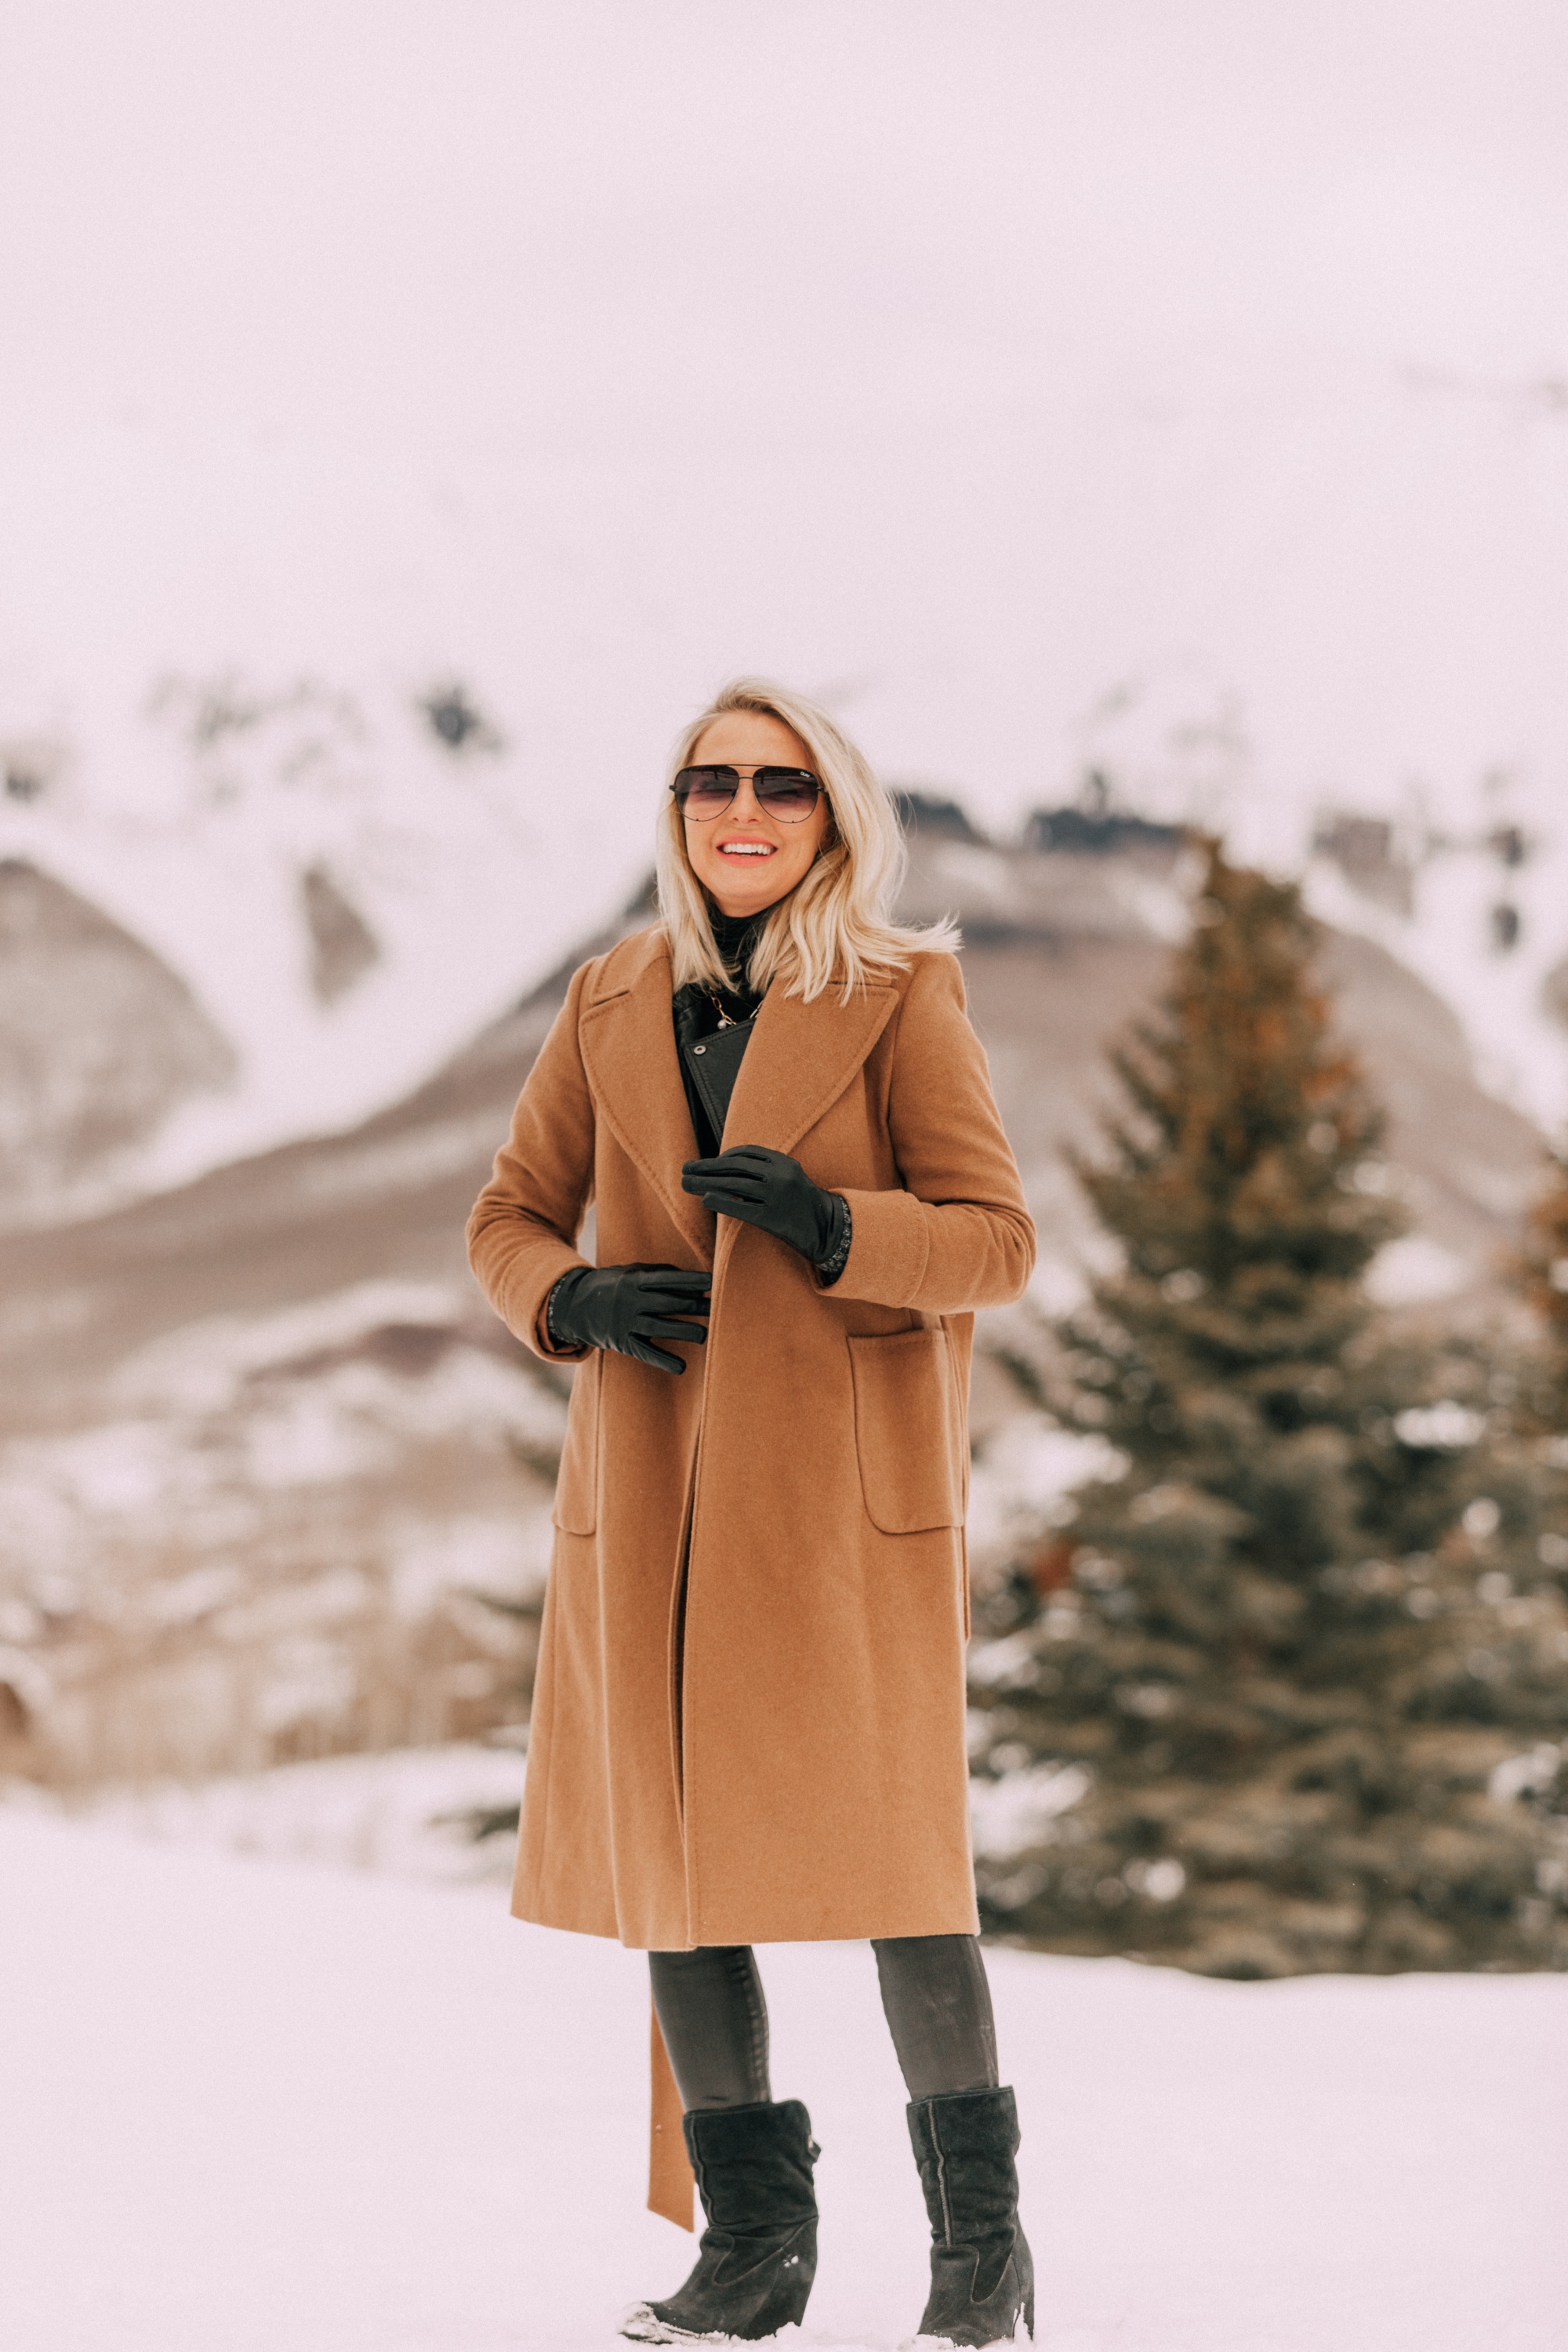 How To Layer A Moto Jacket, Fashion blogger Erin Busbee of BusbeeStyle.com wearing a black leather IRO moto jacket, Carolina Amato gloves, rocket leatherette skinny jeans by Citizens of Humanity, black cashmere turtleneck, and Ugg wedge boots and putting on a wool camel coat by Mackage in Telluride, CO